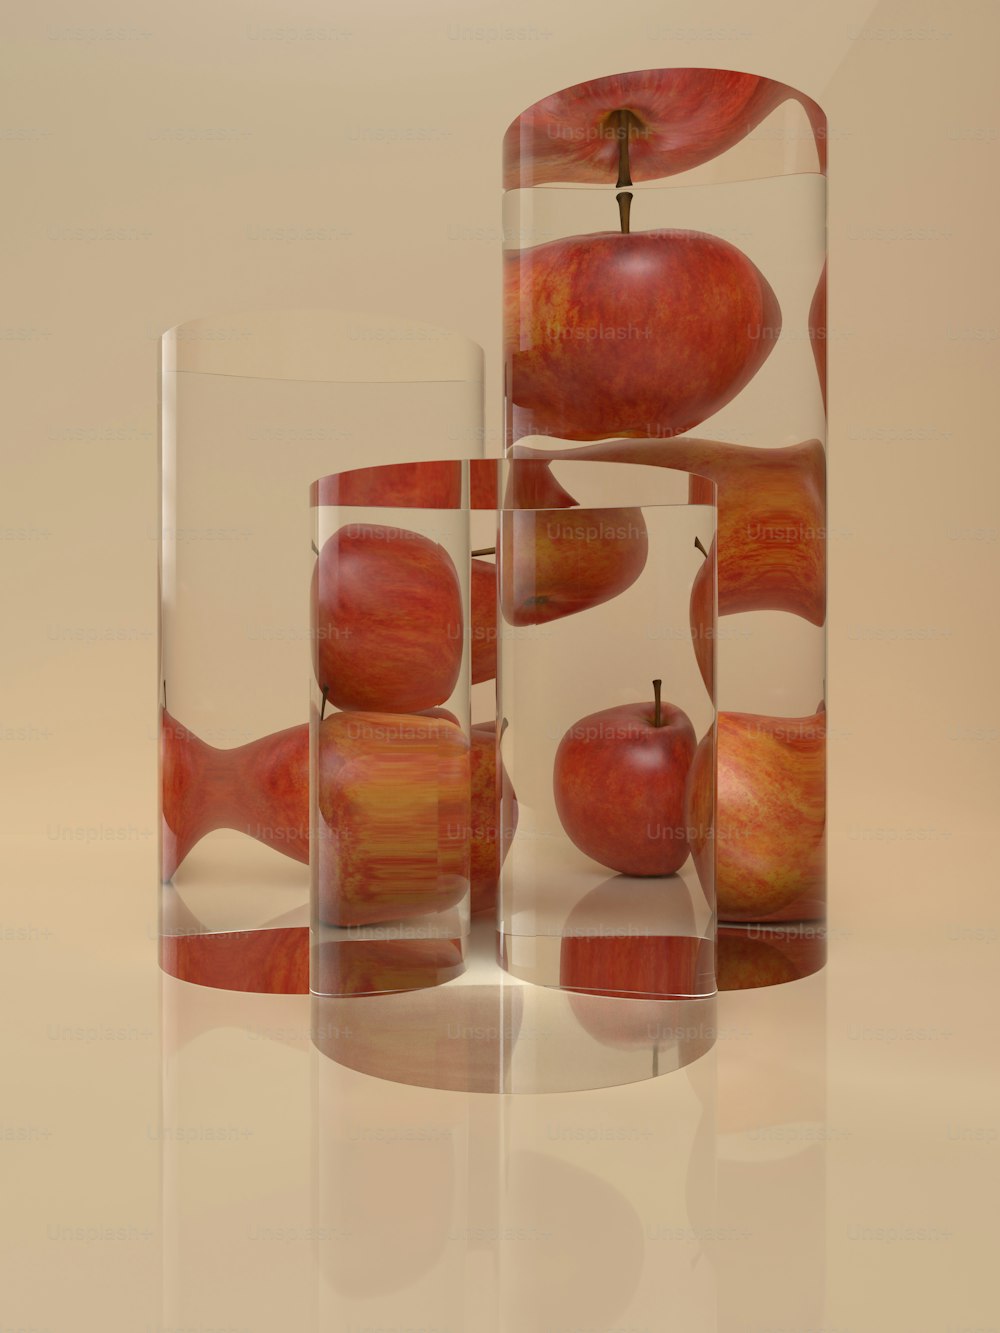 a glass vase with apples inside of it